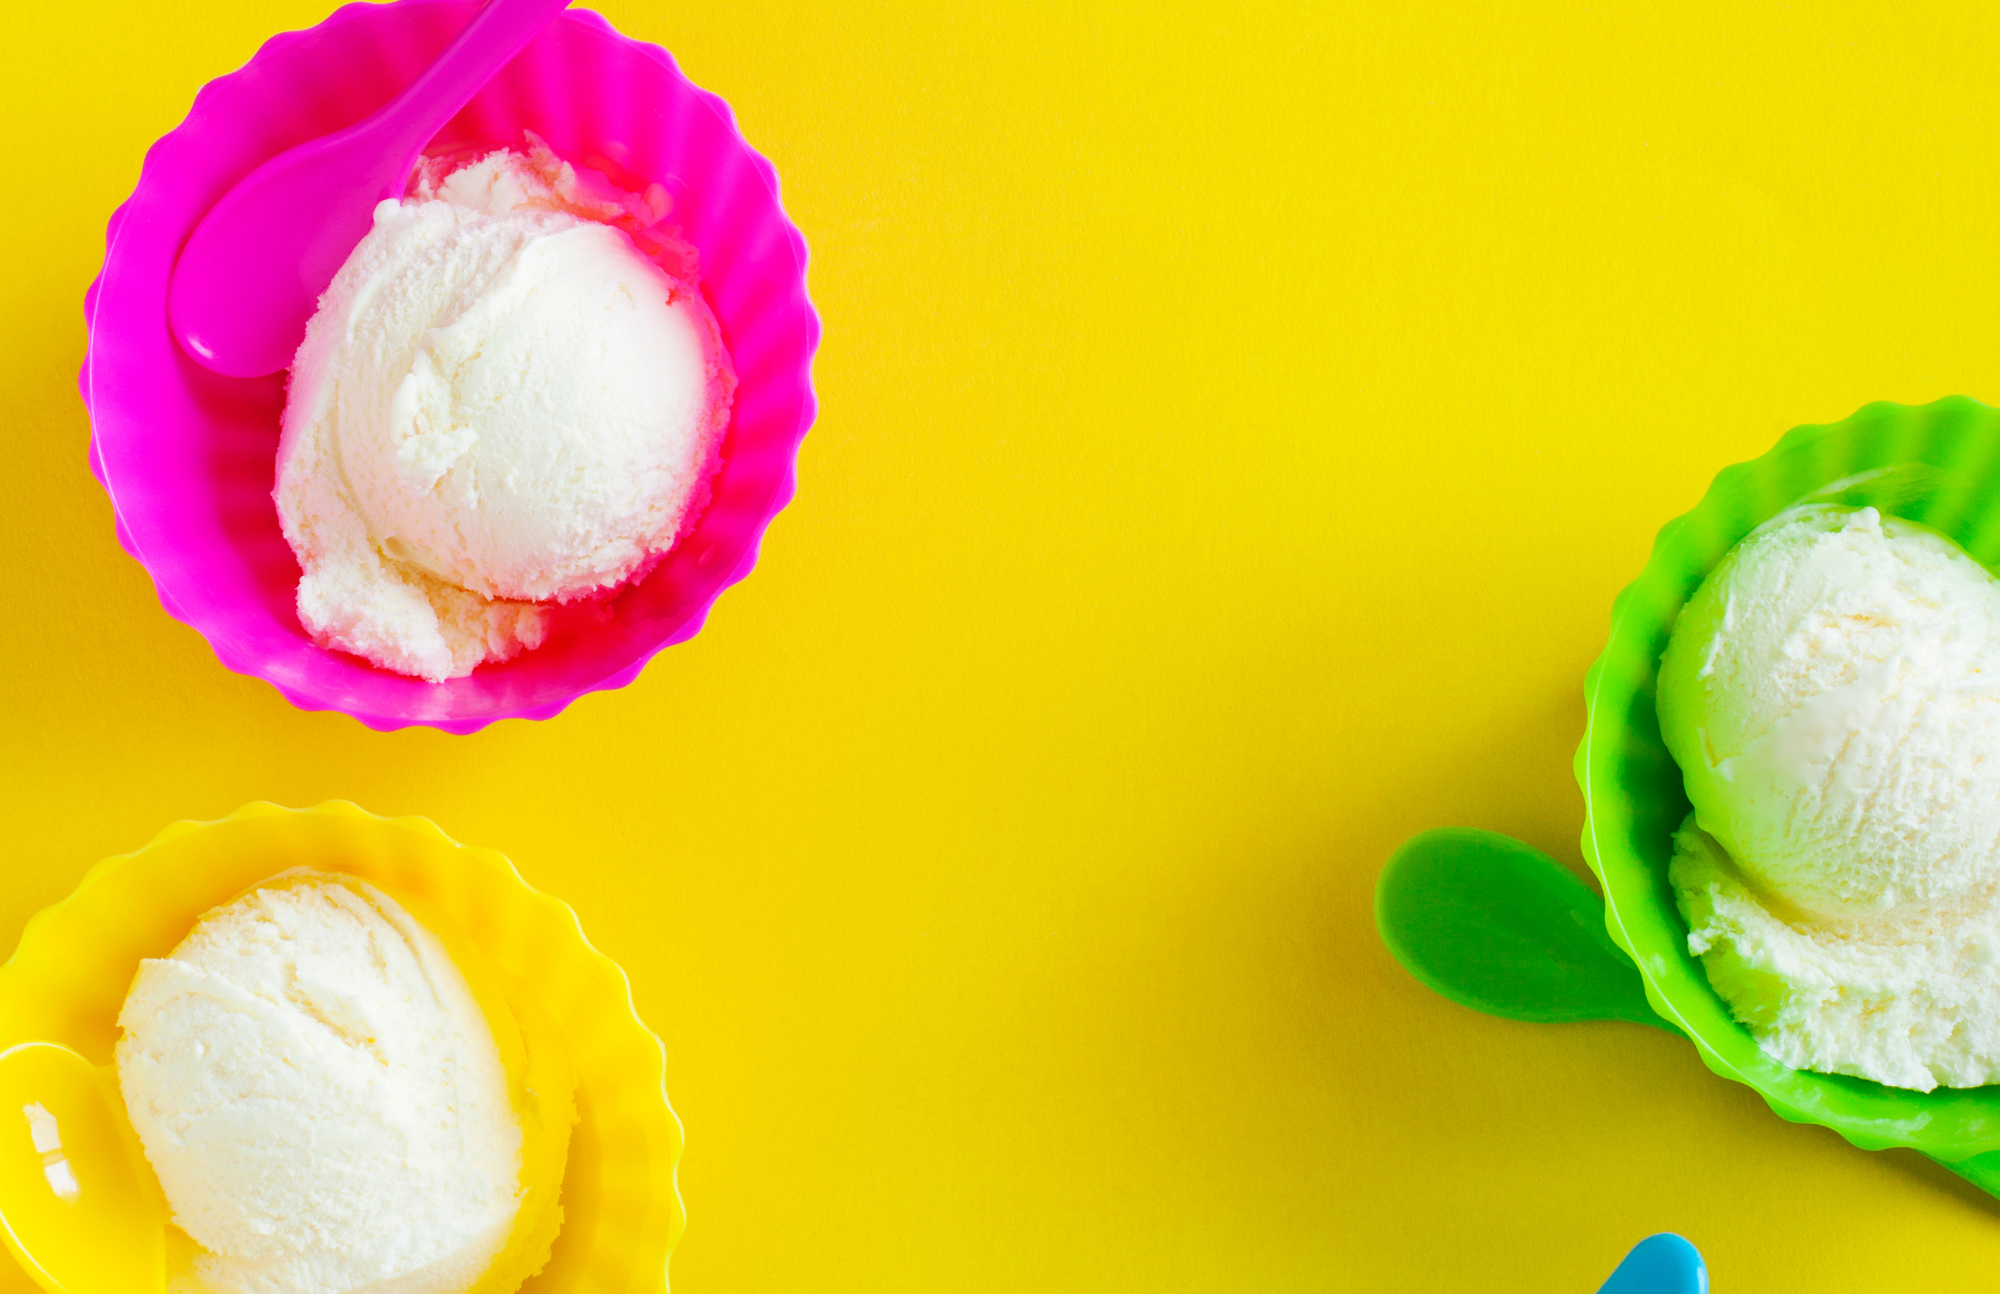 Bright yellow background, three scoops of vanilla ice cream each in bright pink, yellow, or green cups